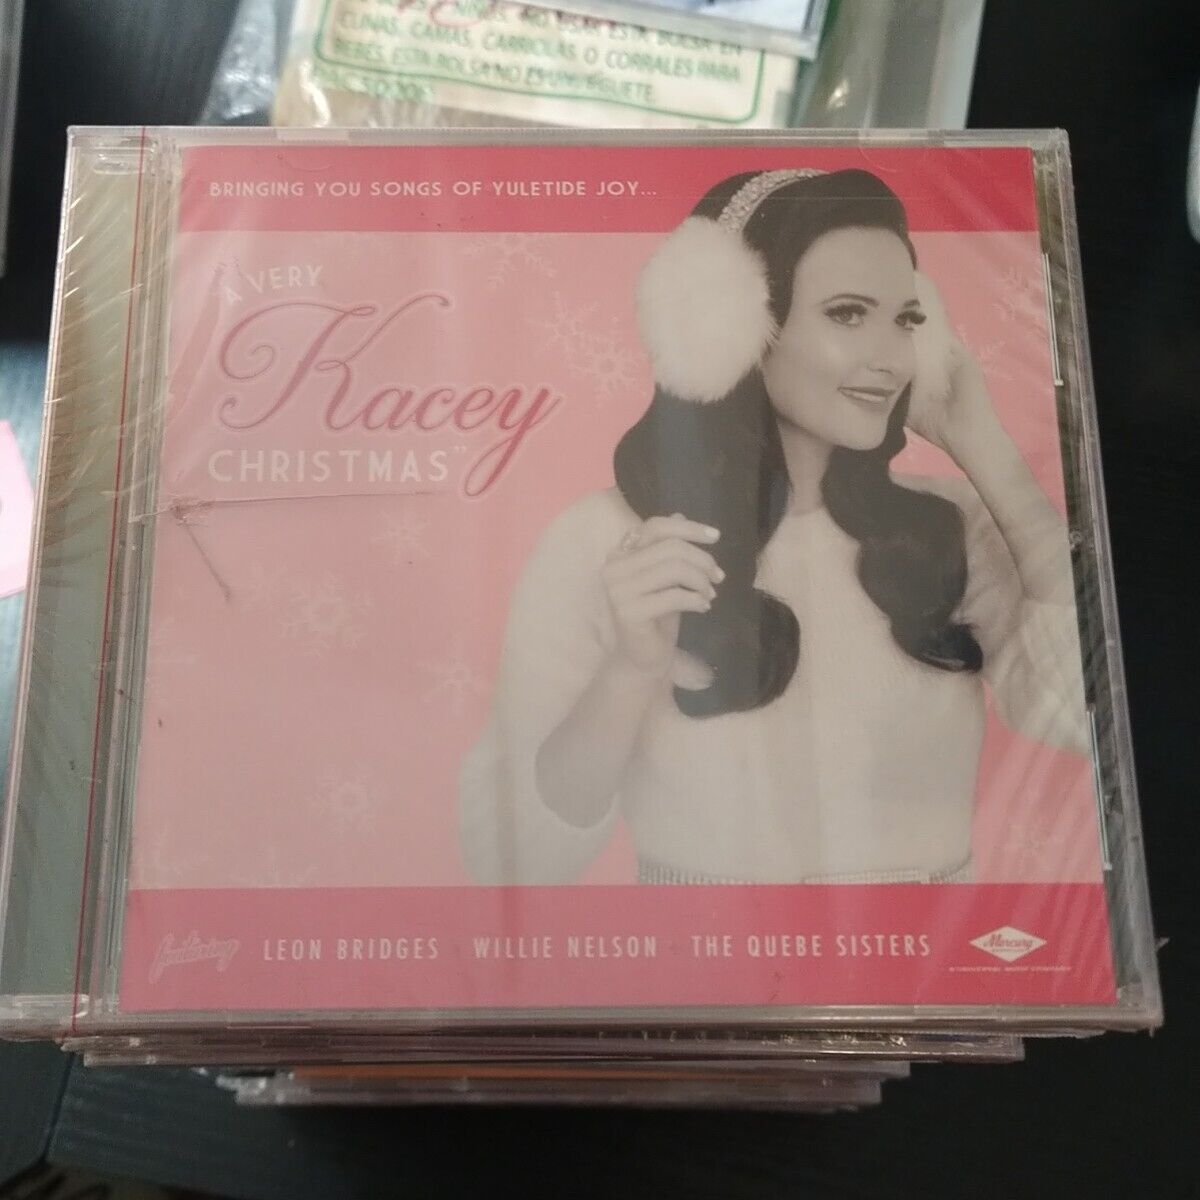 Kacey Musgraves A Very Kacey Christmas  CD [SEALED] DAMAGED CASE & SEAL